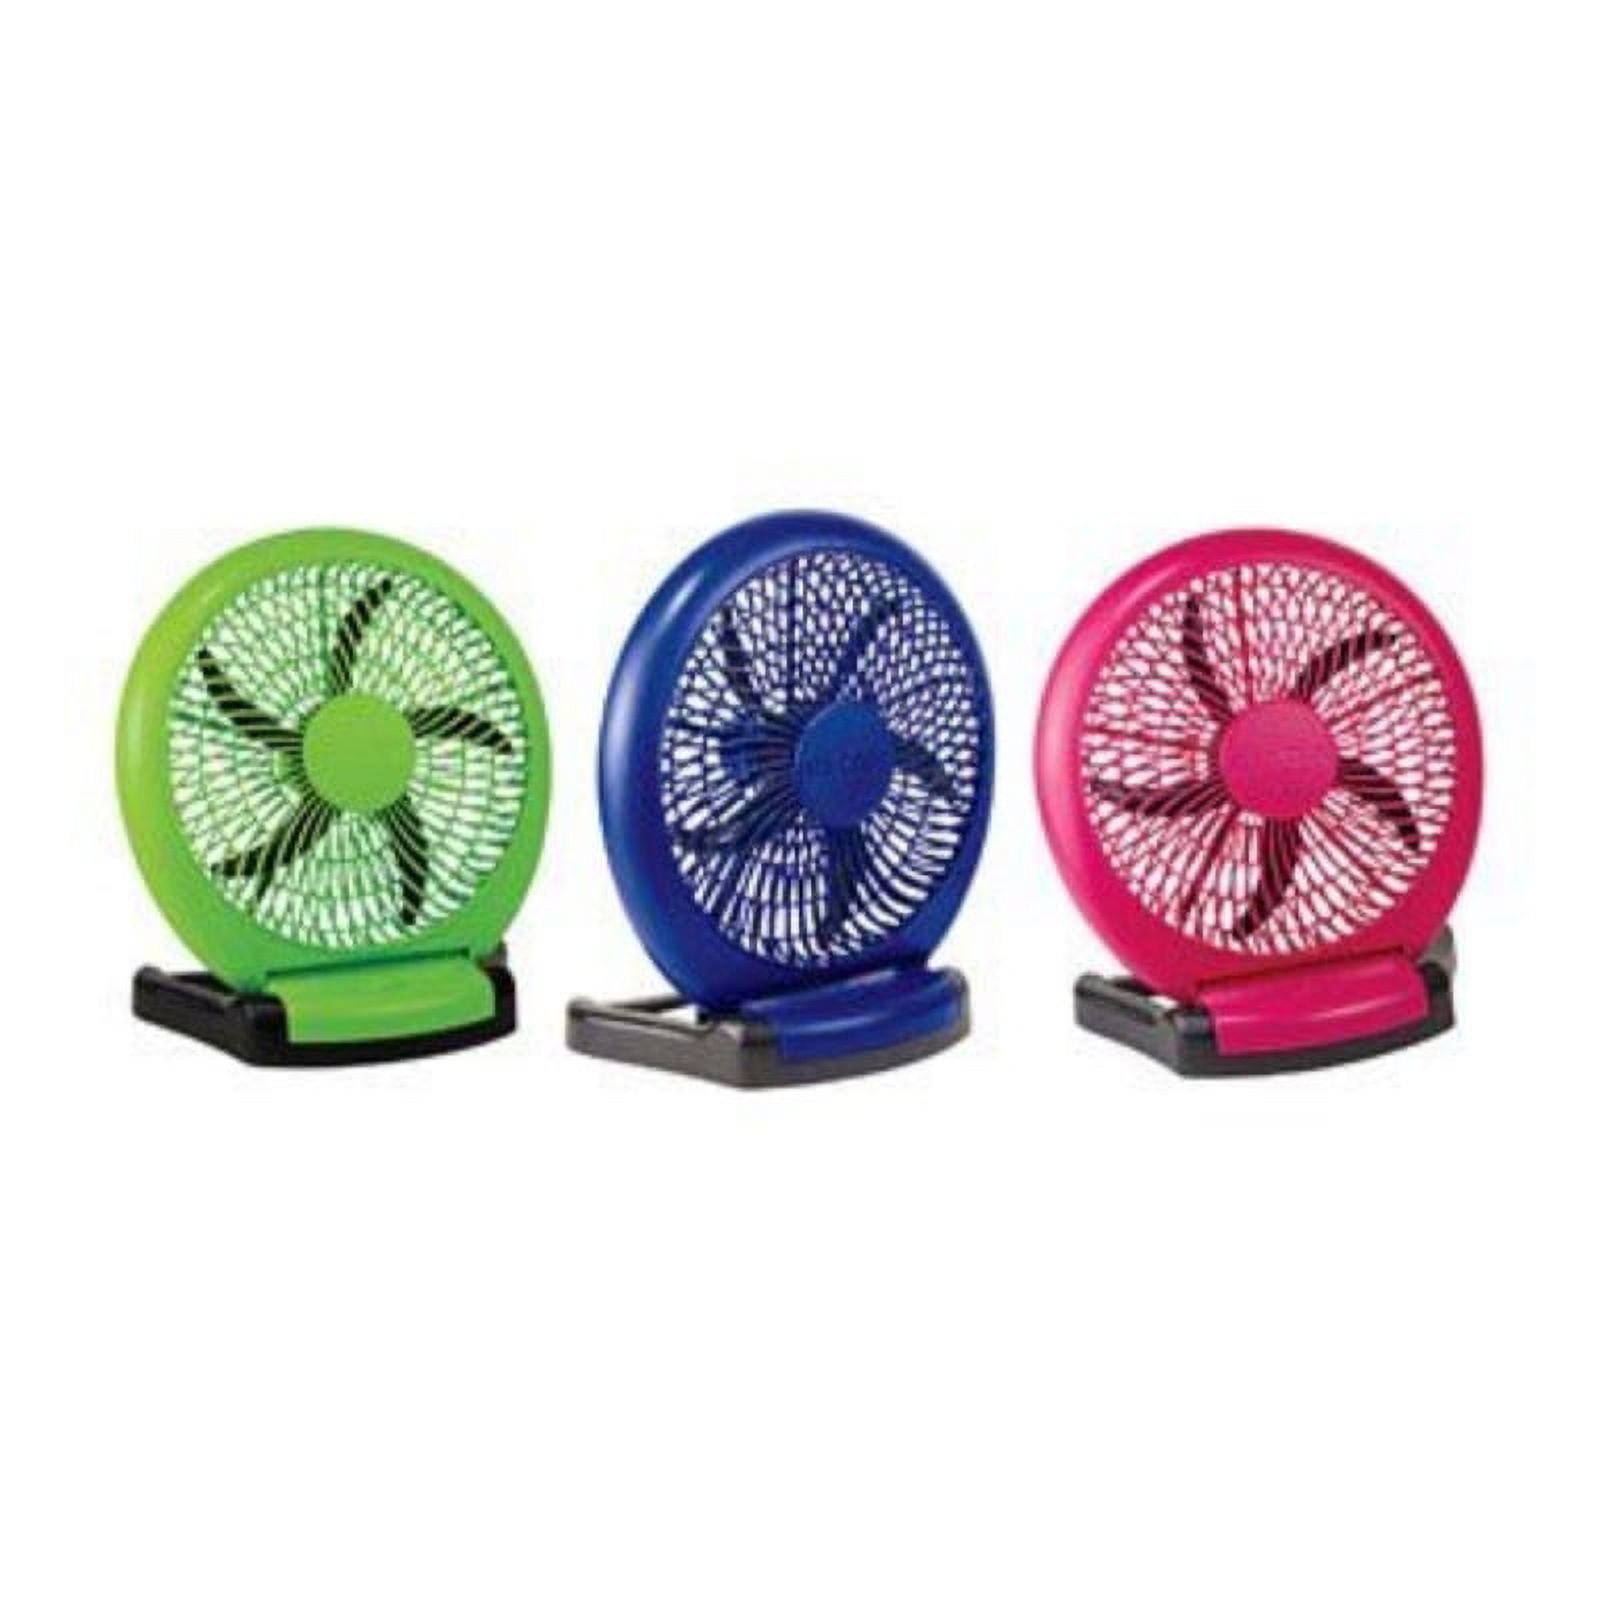 o2 cool fan 8 in. 2 speed assorted colors, blue, green ac adapter - image 1 of 1